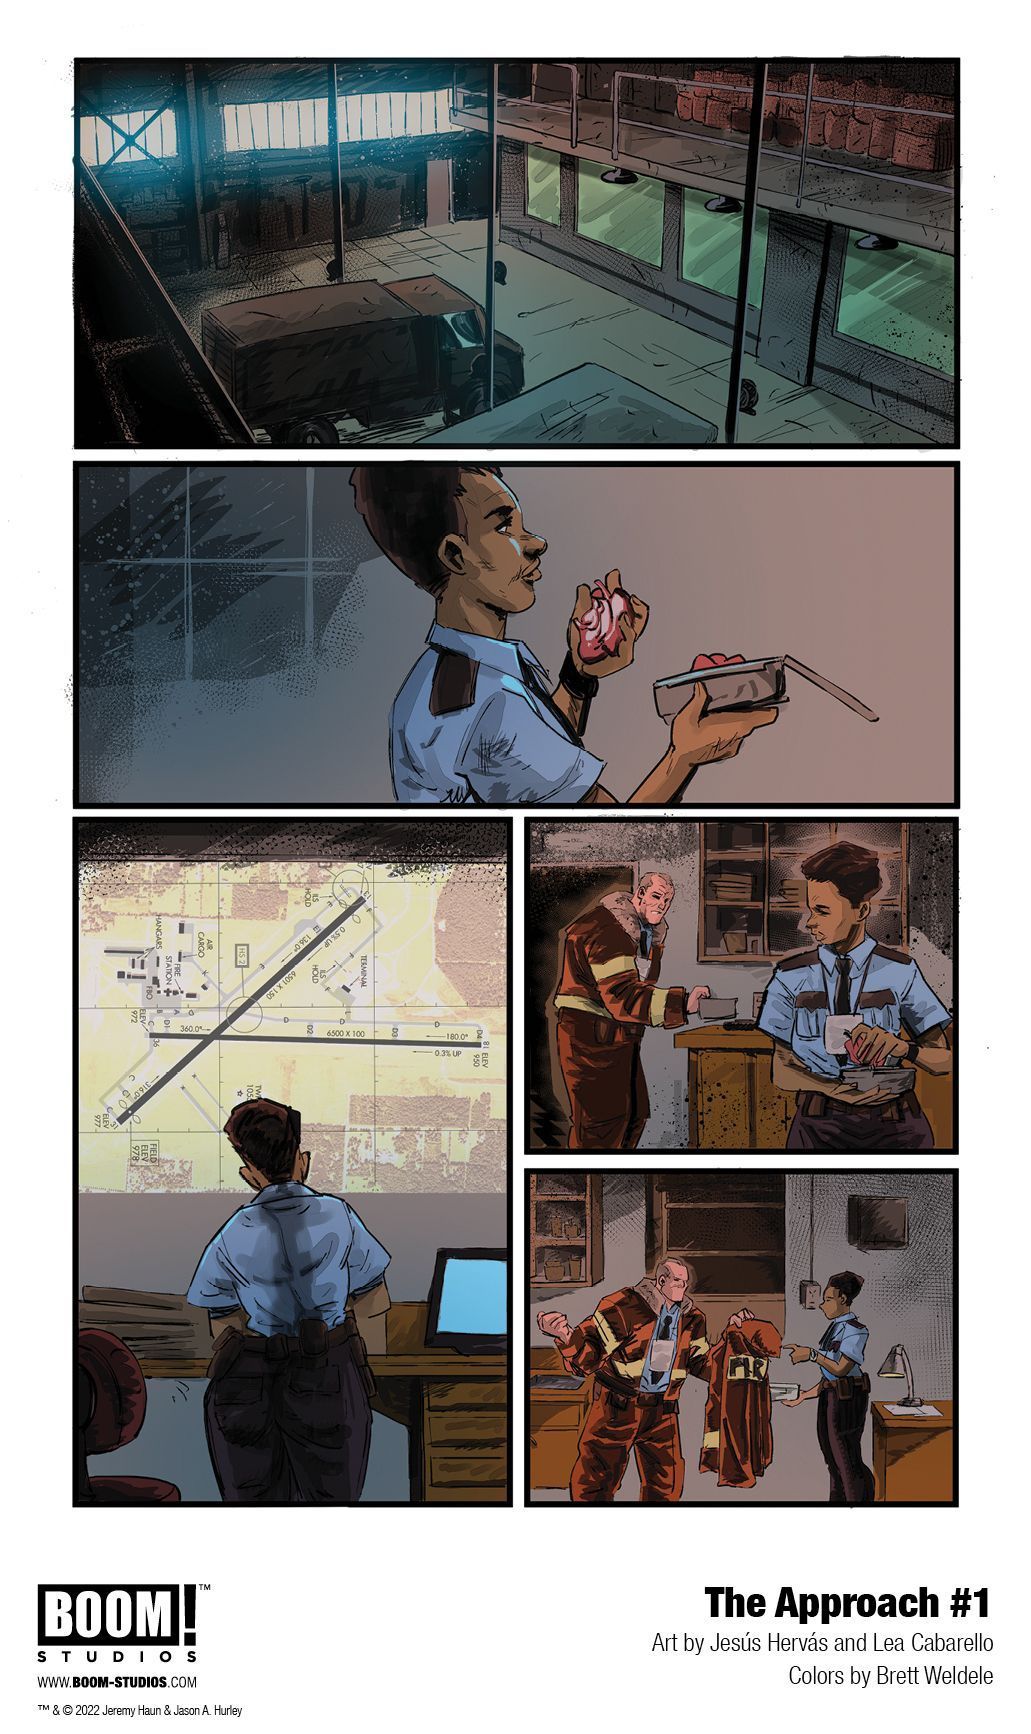 THE APPROACH #1 From BOOM! Studios